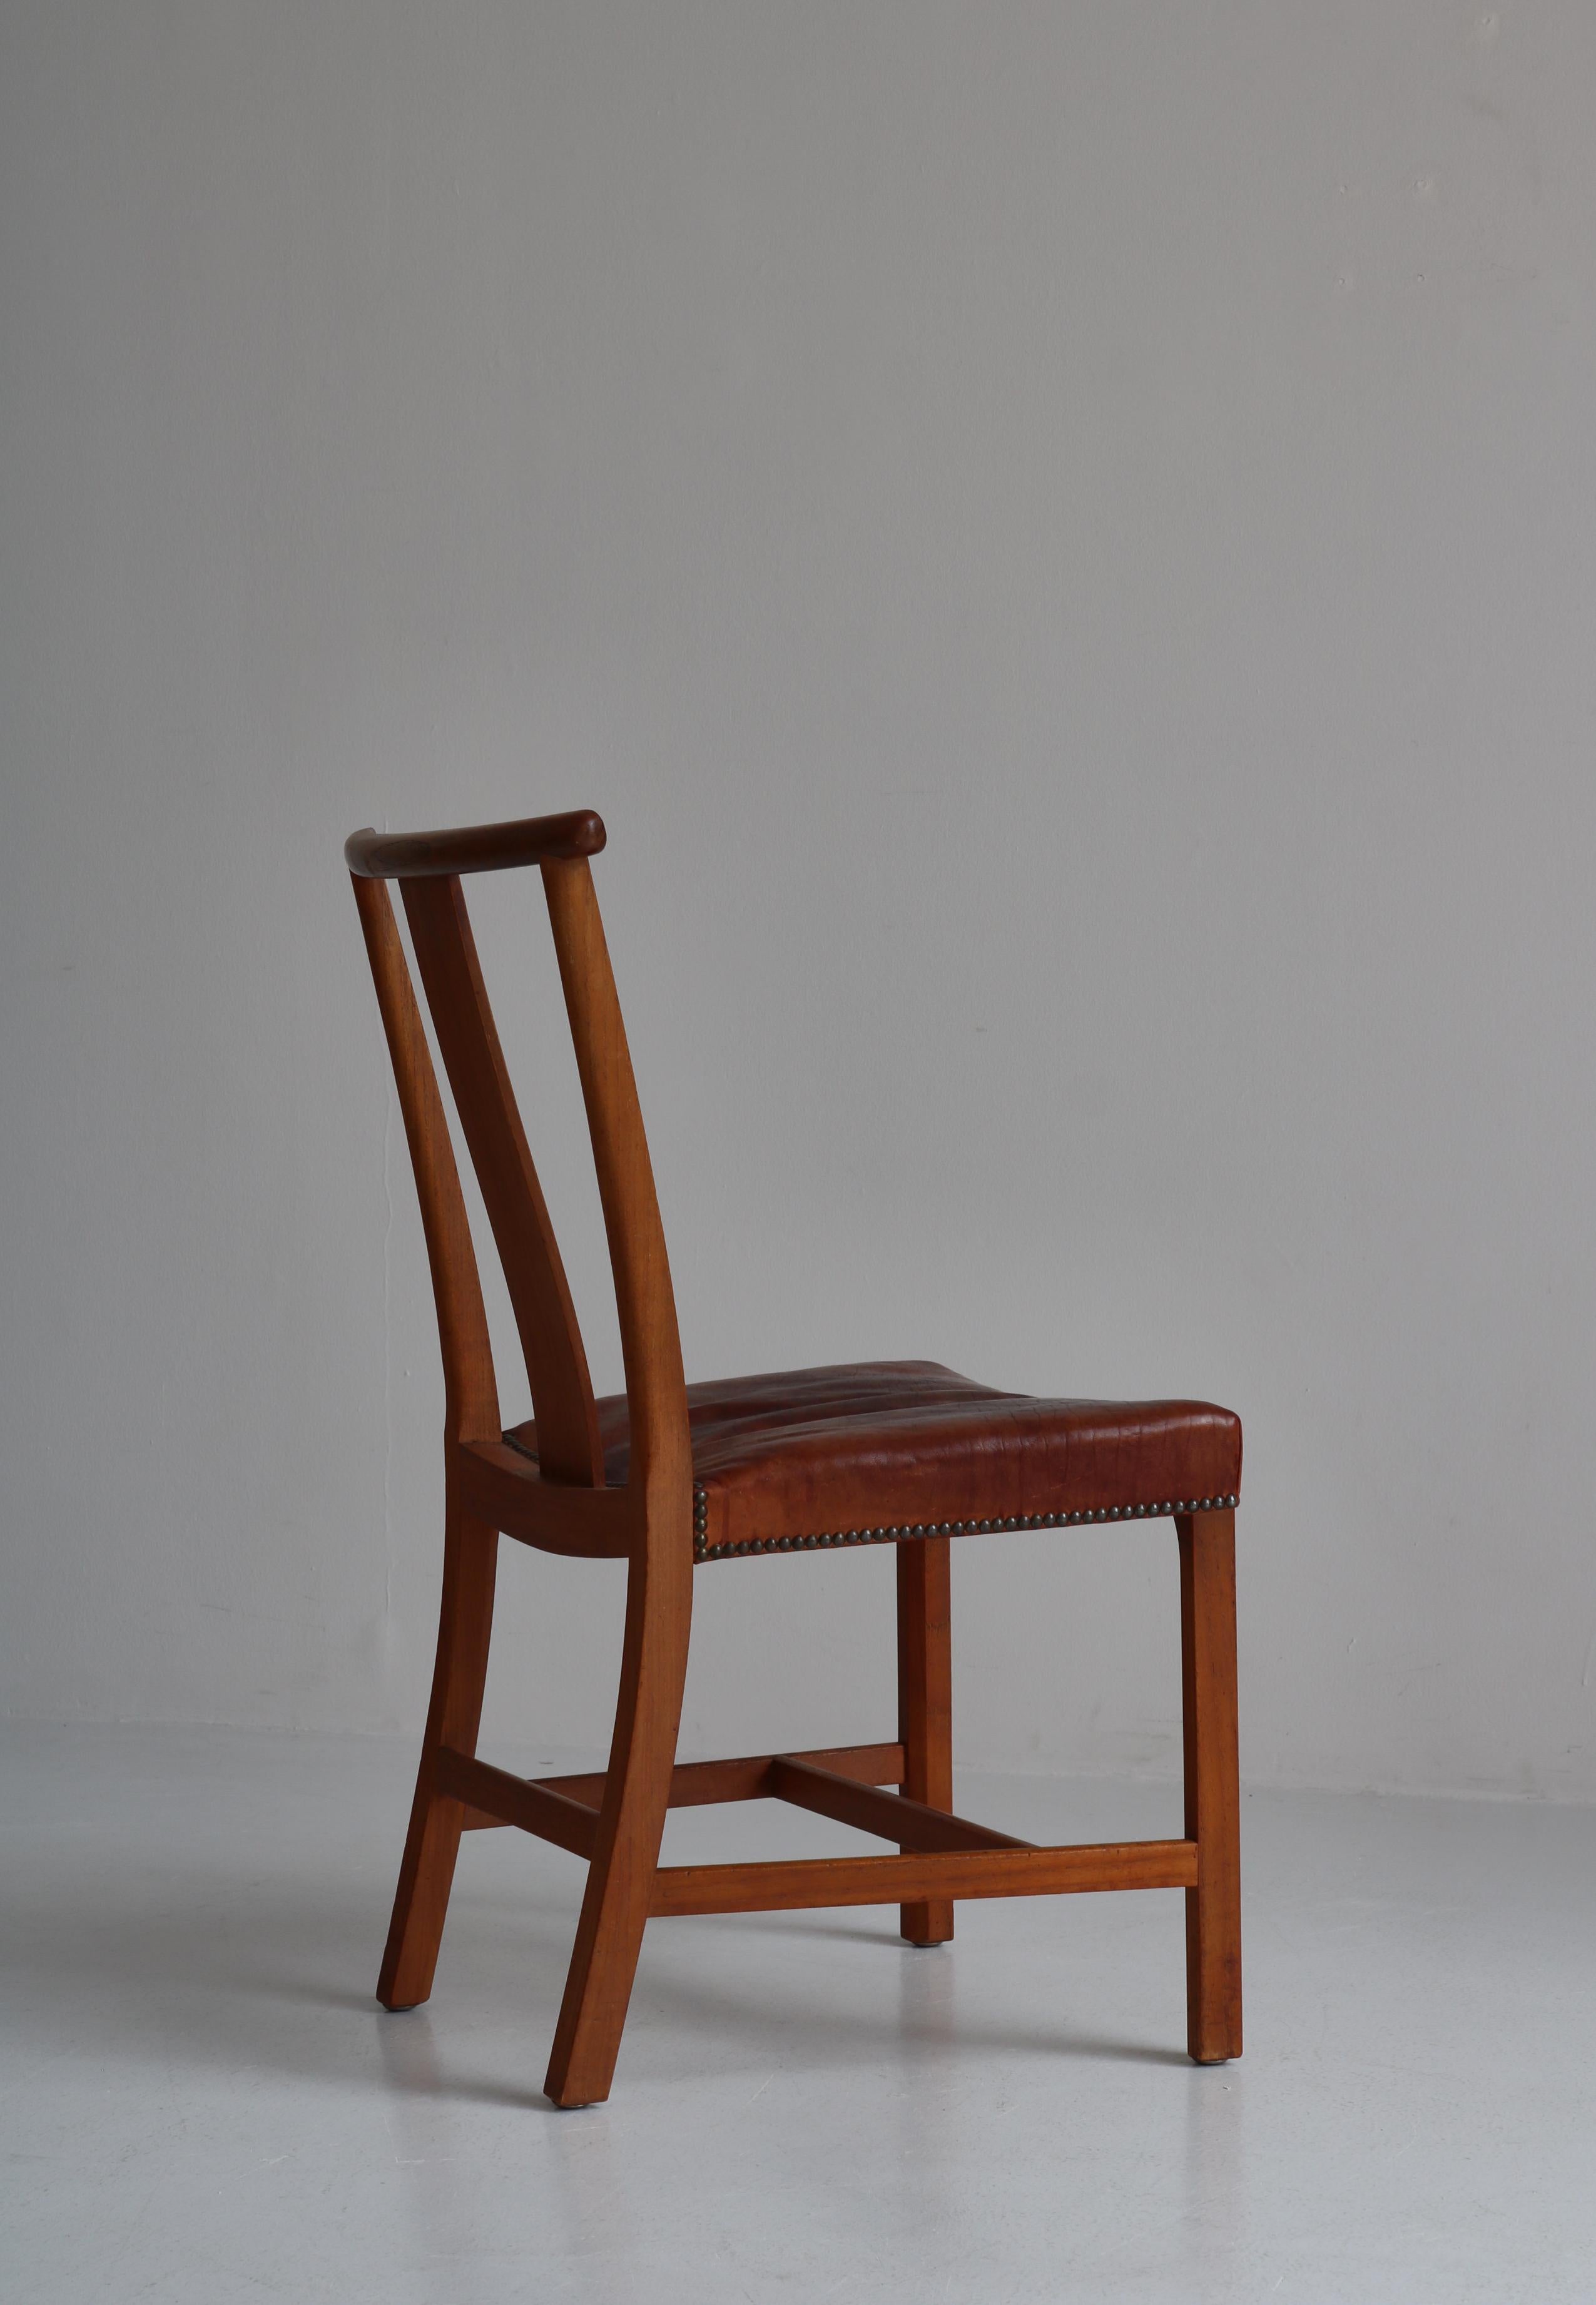 Set of Six Børge Mogensen Dining Chairs in Teak & Niger Leather, 1939, Denmark For Sale 11